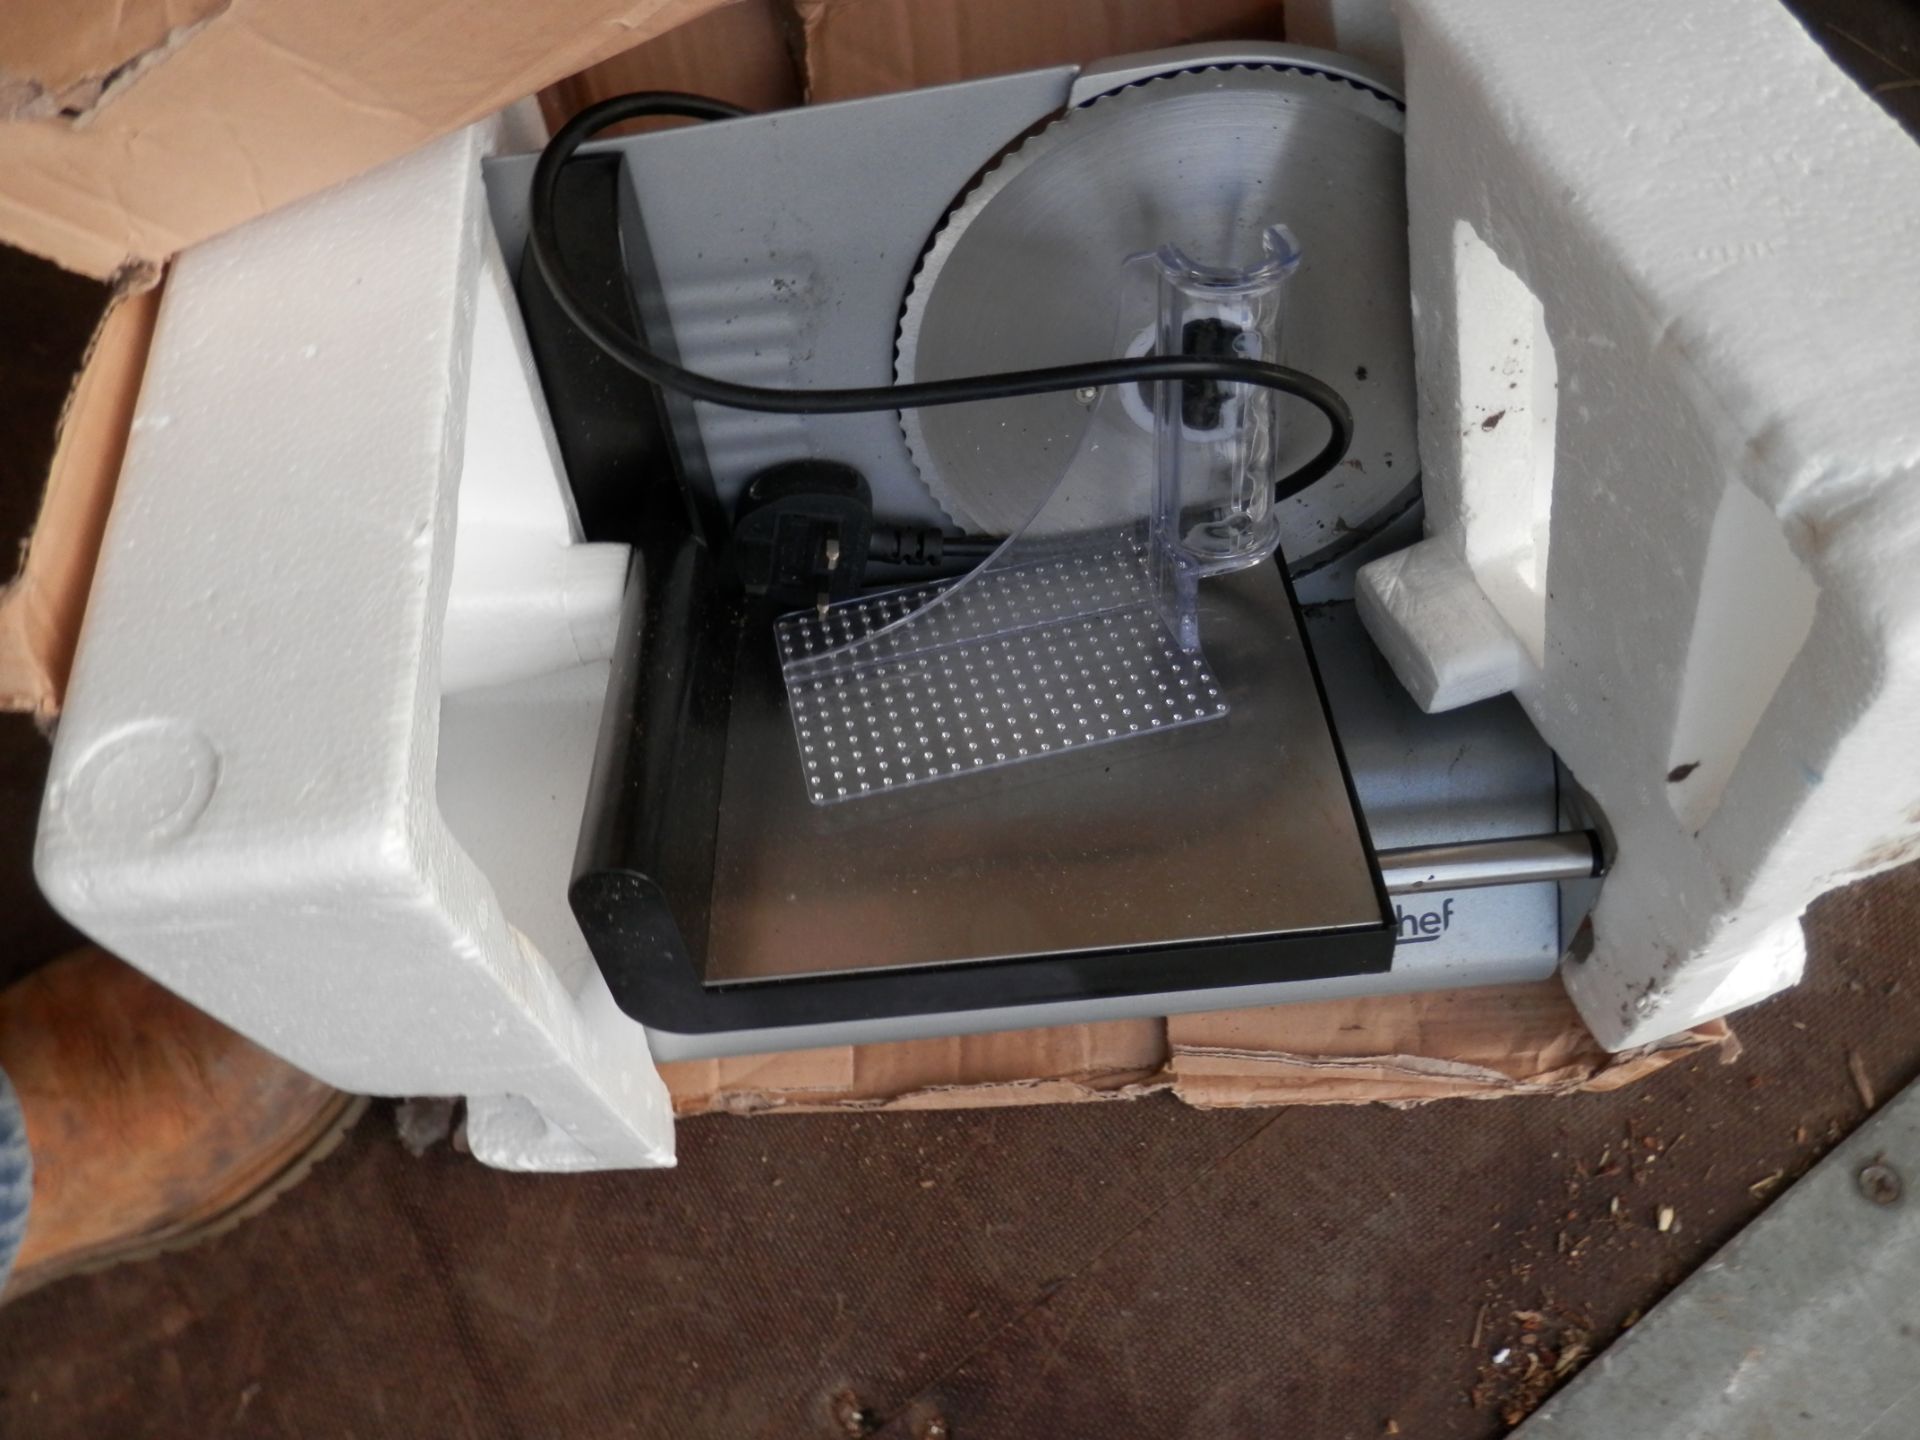 NEW BOXED SHEF 240V FOOD SLICER, BOX DAMAGED AS PICTURED. WITH MANUAL - Image 2 of 2